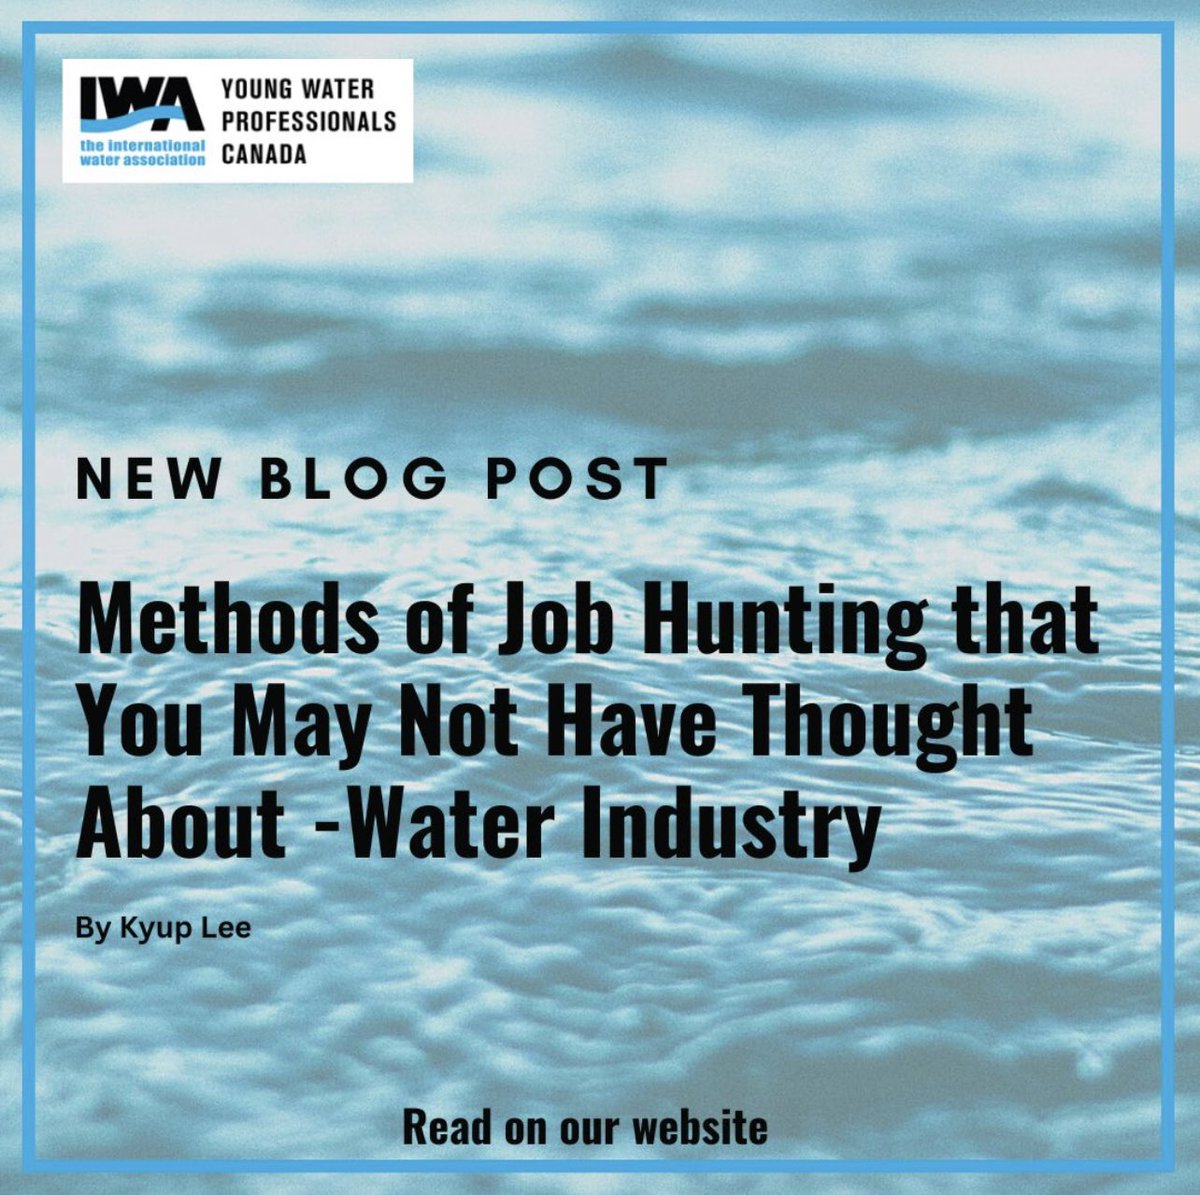 Methods of job hunting that you may not have thought about- water industry written by Kyup Lee on our website:

iwa-ywp.ca/2023/04/12/met…

#Can_IWAYWP